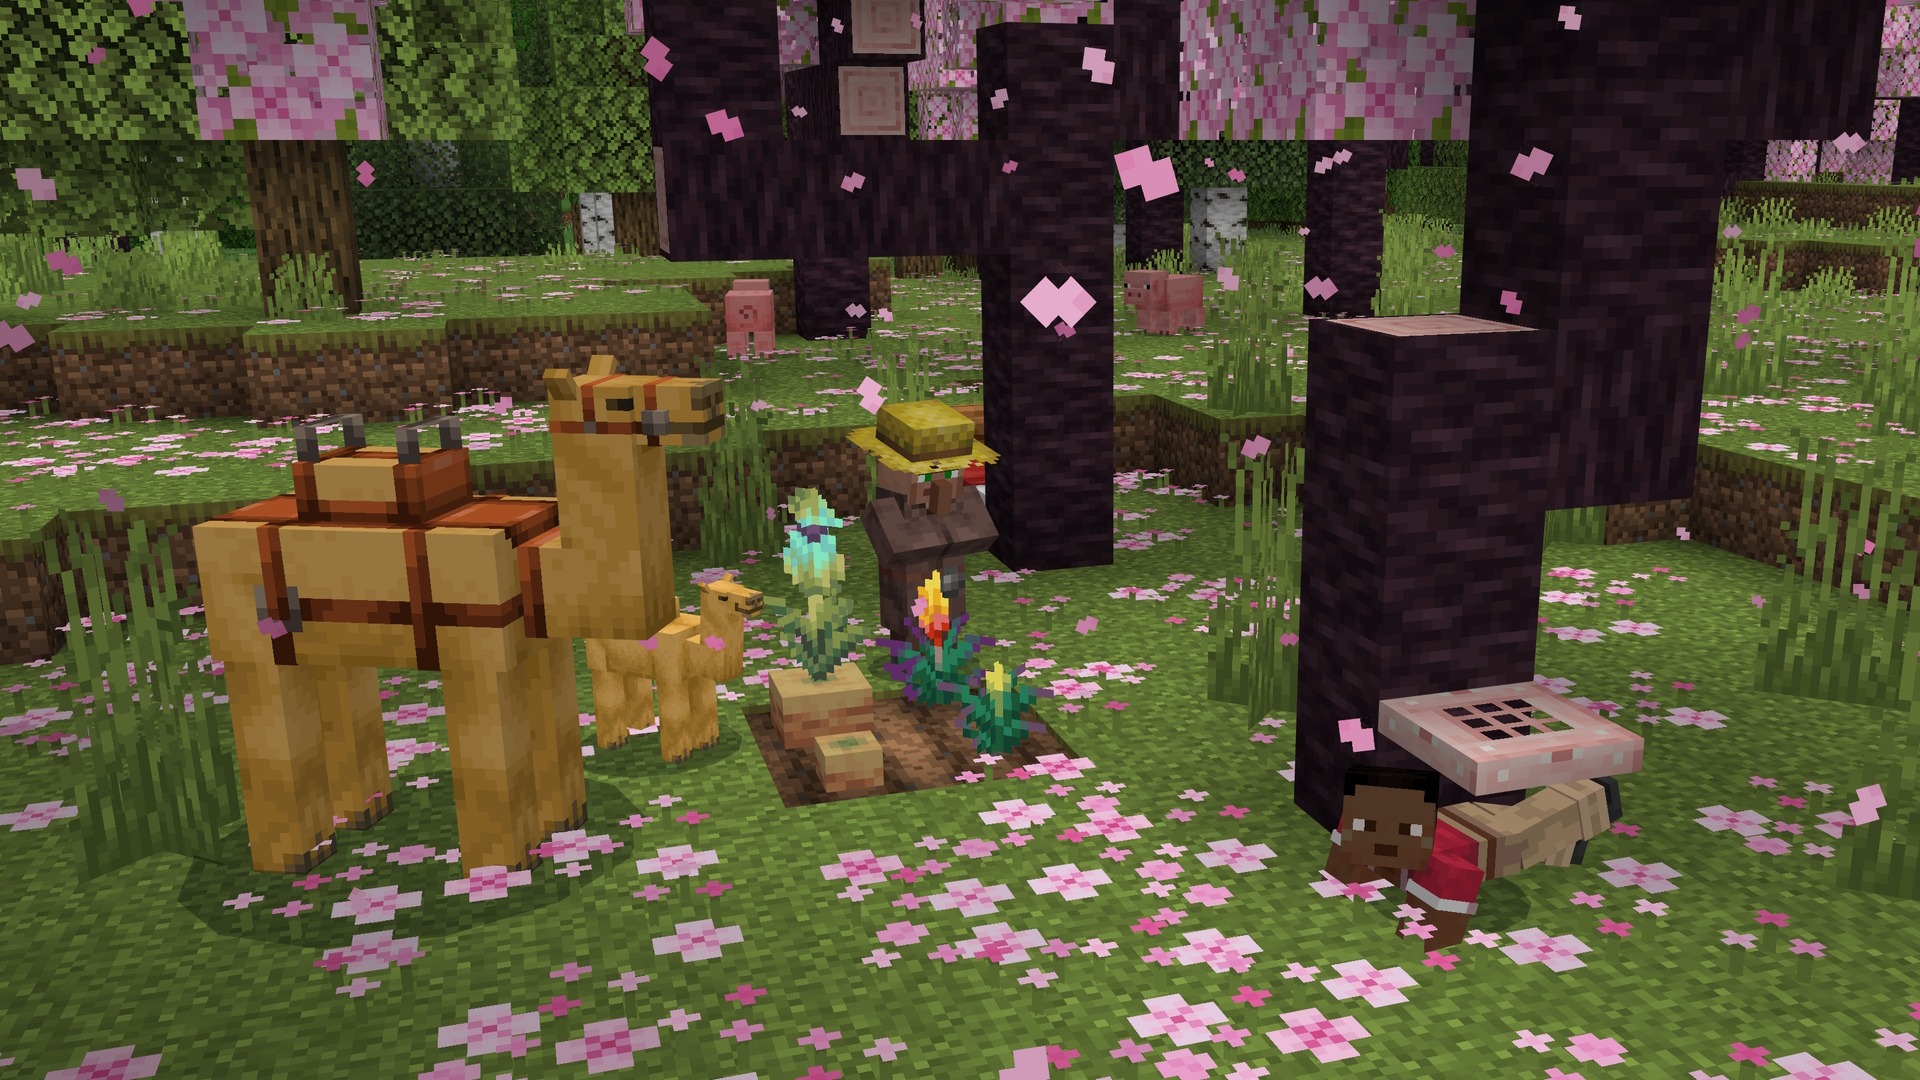 A Minecraft screenshot featuring a player crawling under a cherry wood trapdoor in a cherry grove, with a villager standing near some planted flowers, and a pair of camels.